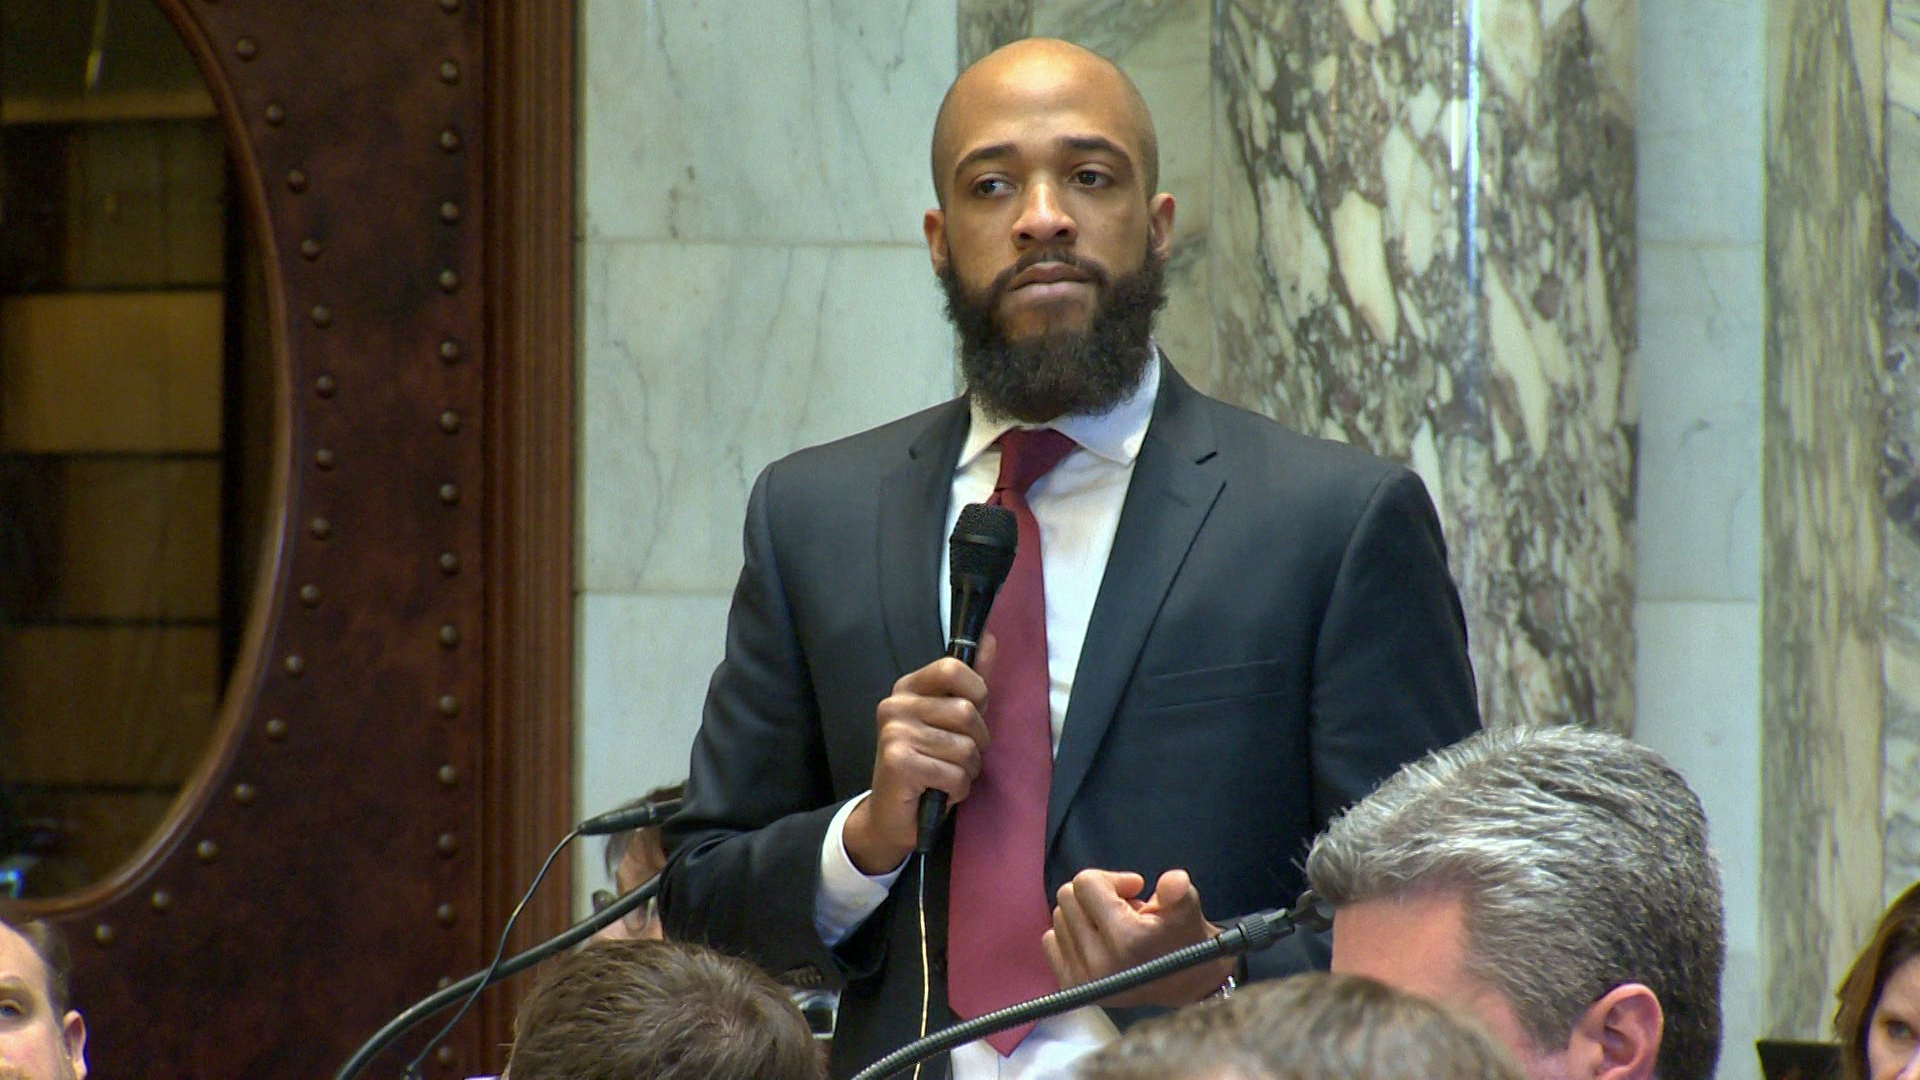 Mandela Barnes speaks into a microphone while standing in a room with marble masonry and pillars, with other people seated around him.